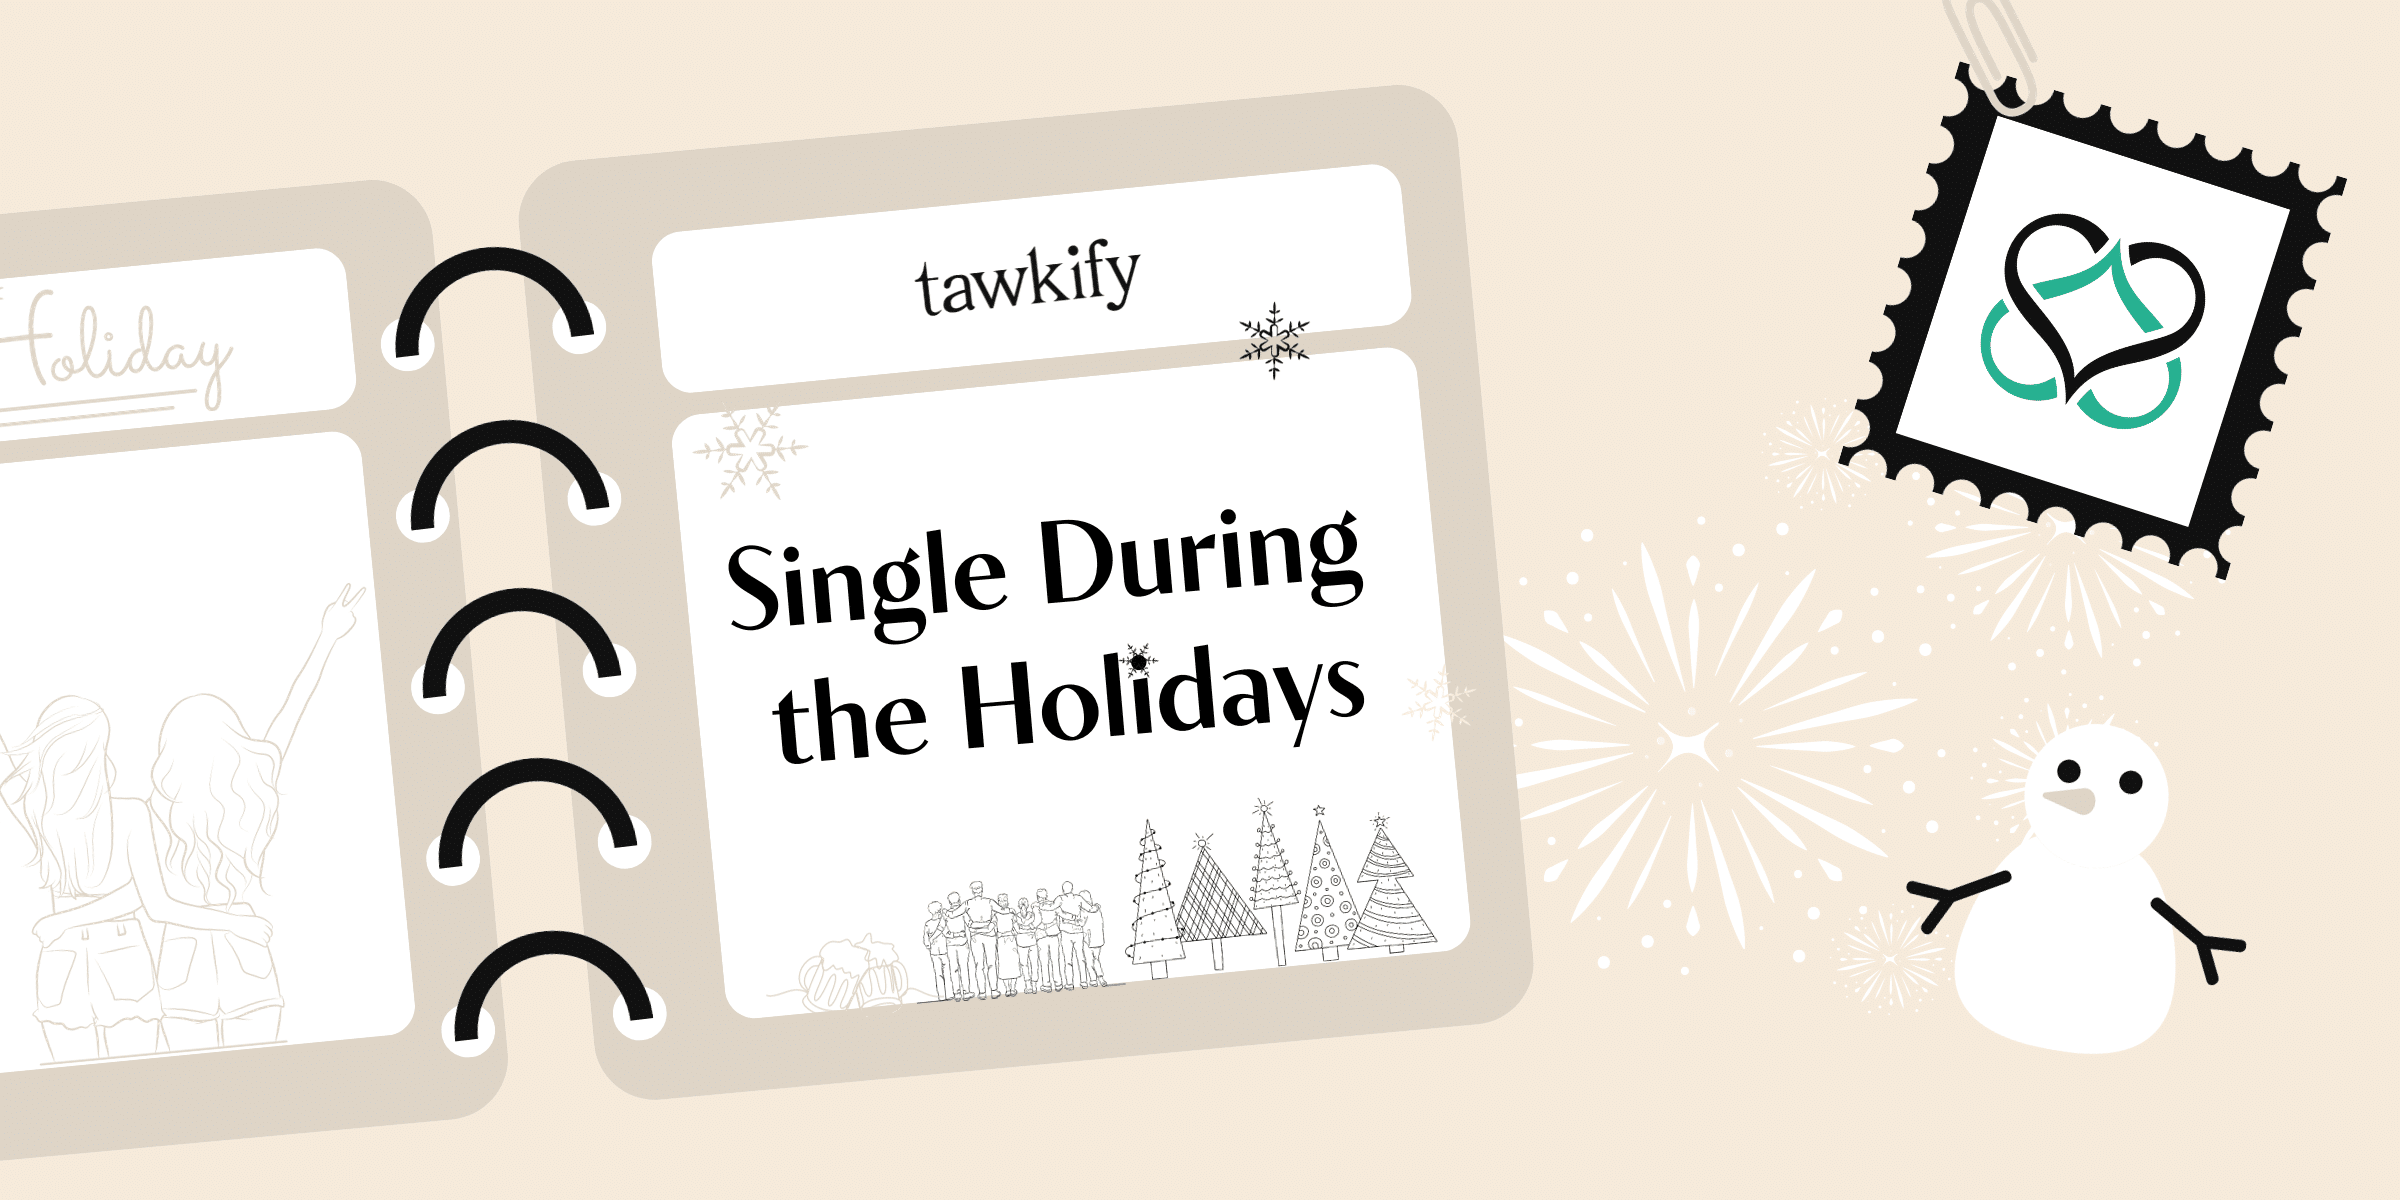 Don’t let yourself feel single and lonely this holiday season! Check out our guide on how to survive the holidays and enjoy the perks of being single.